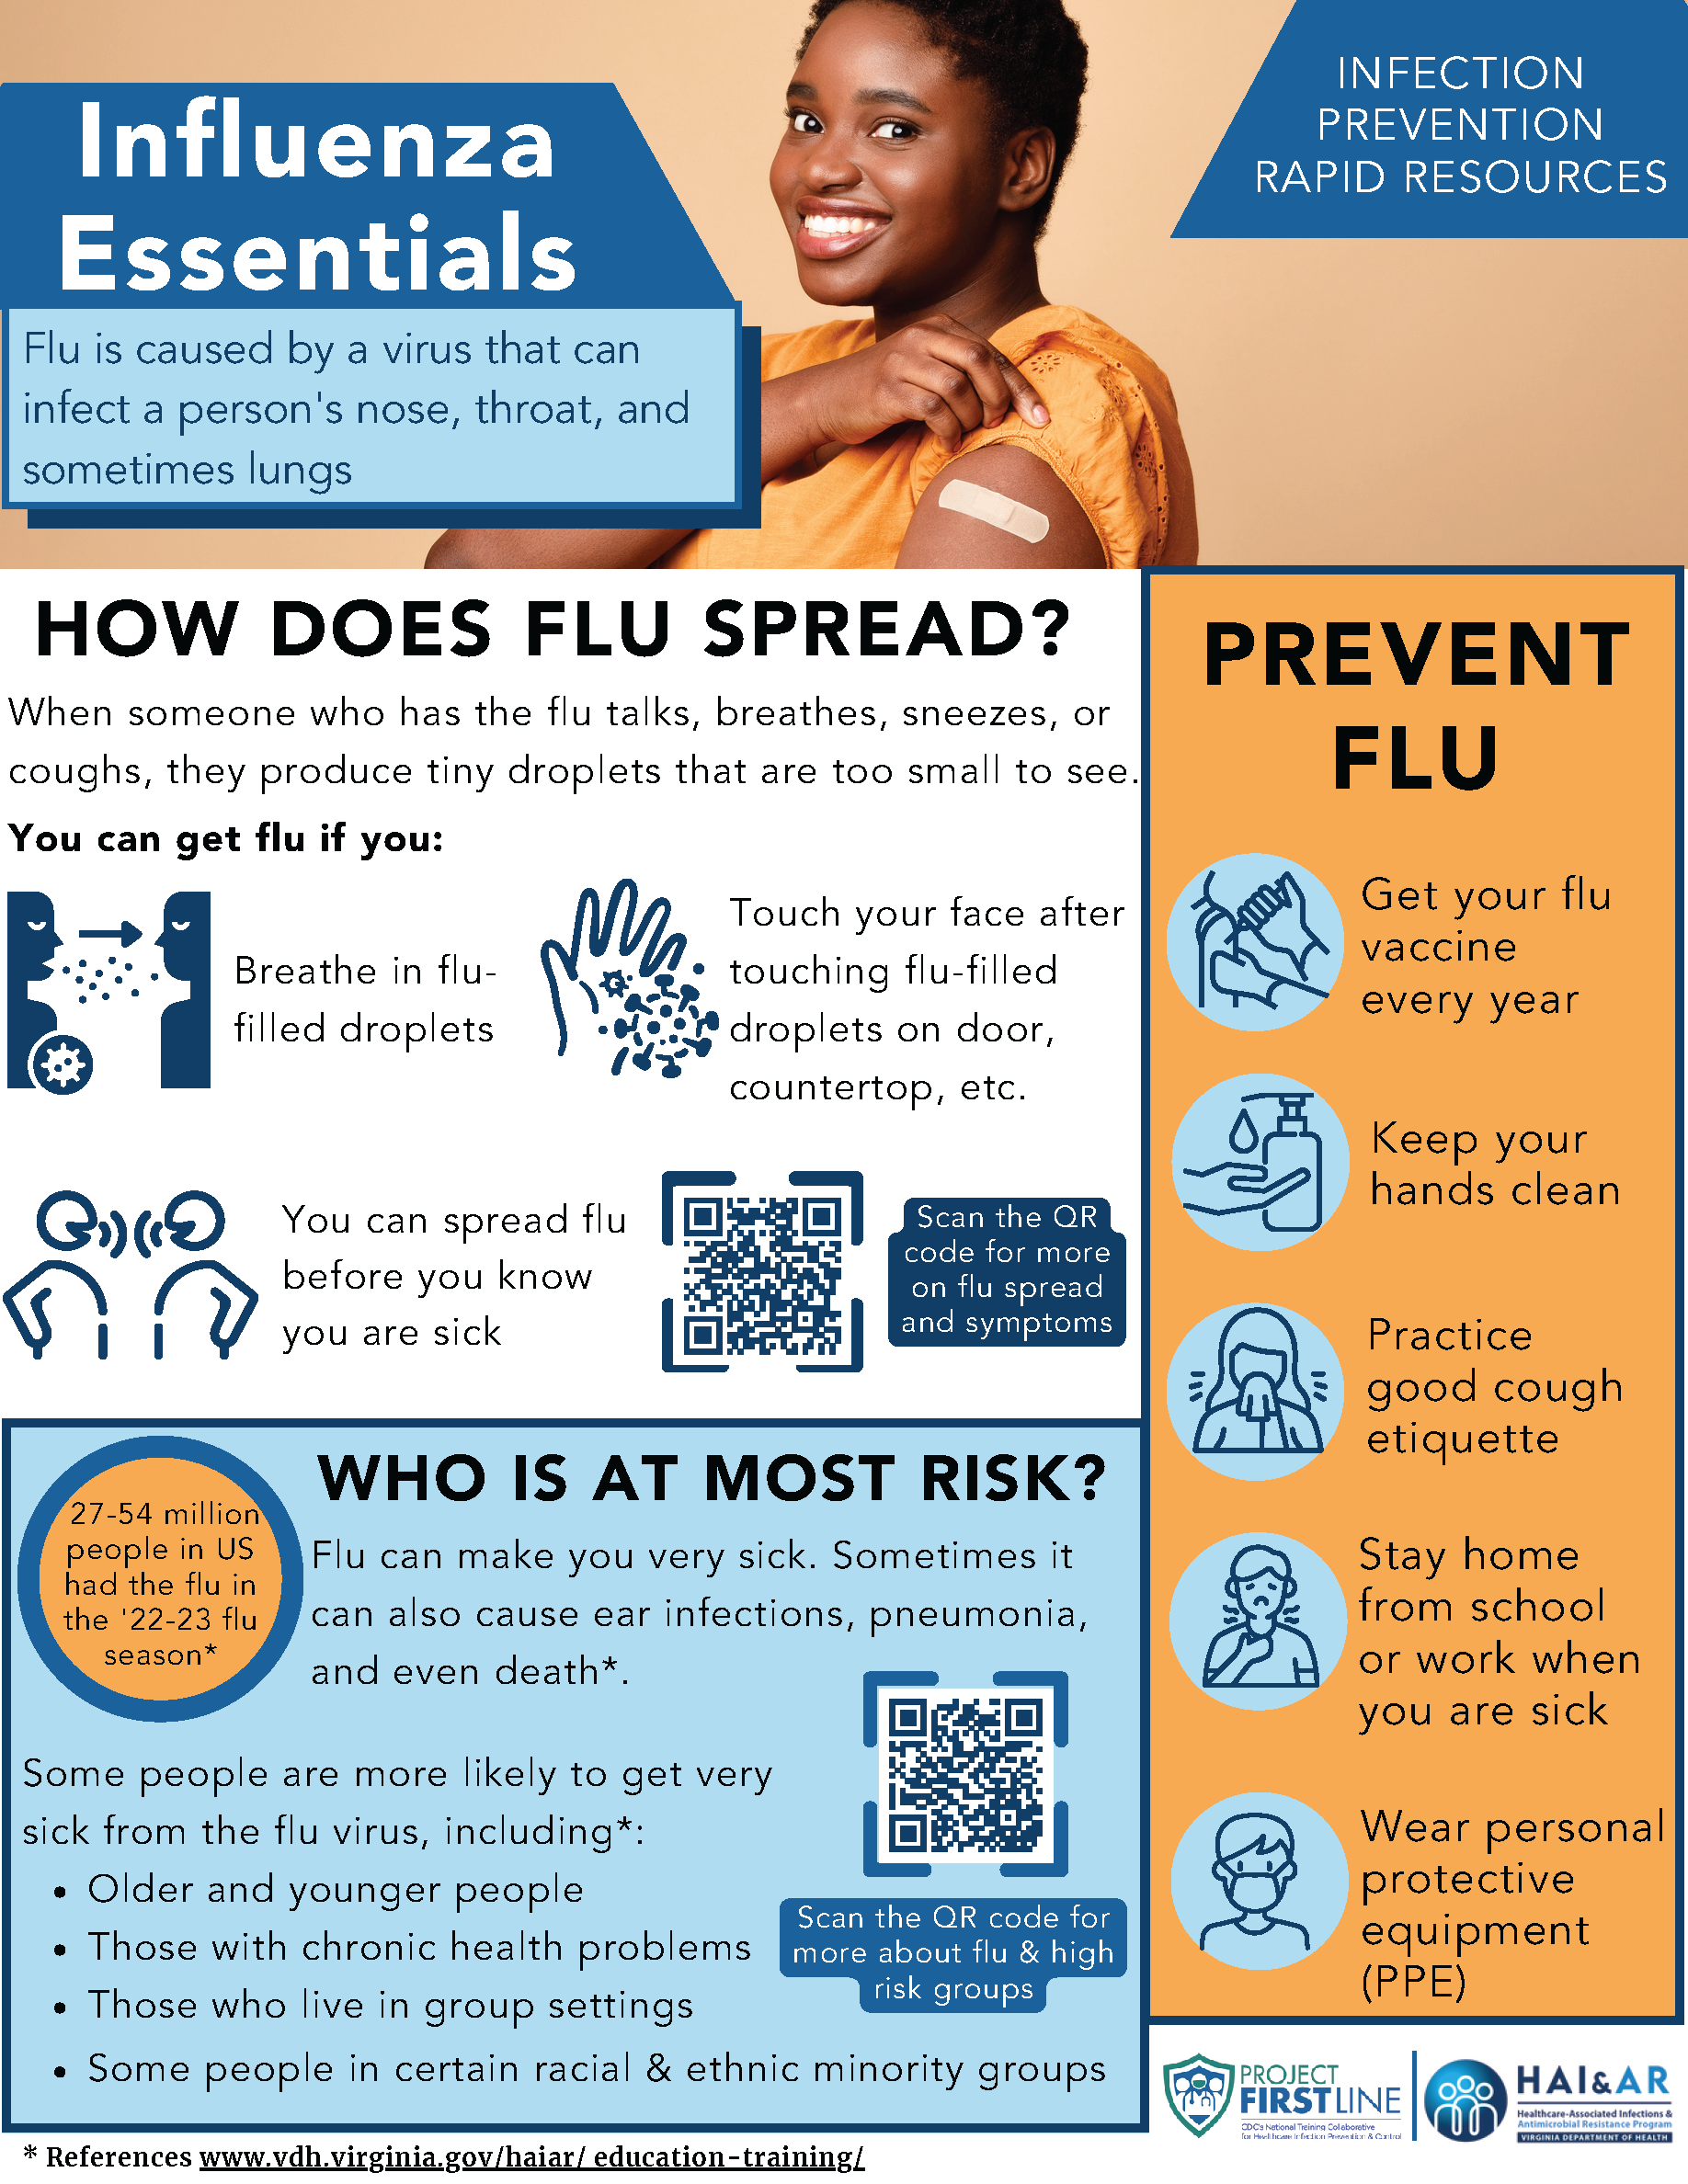 Mini-image of the Influenza Essentials informational flyer.